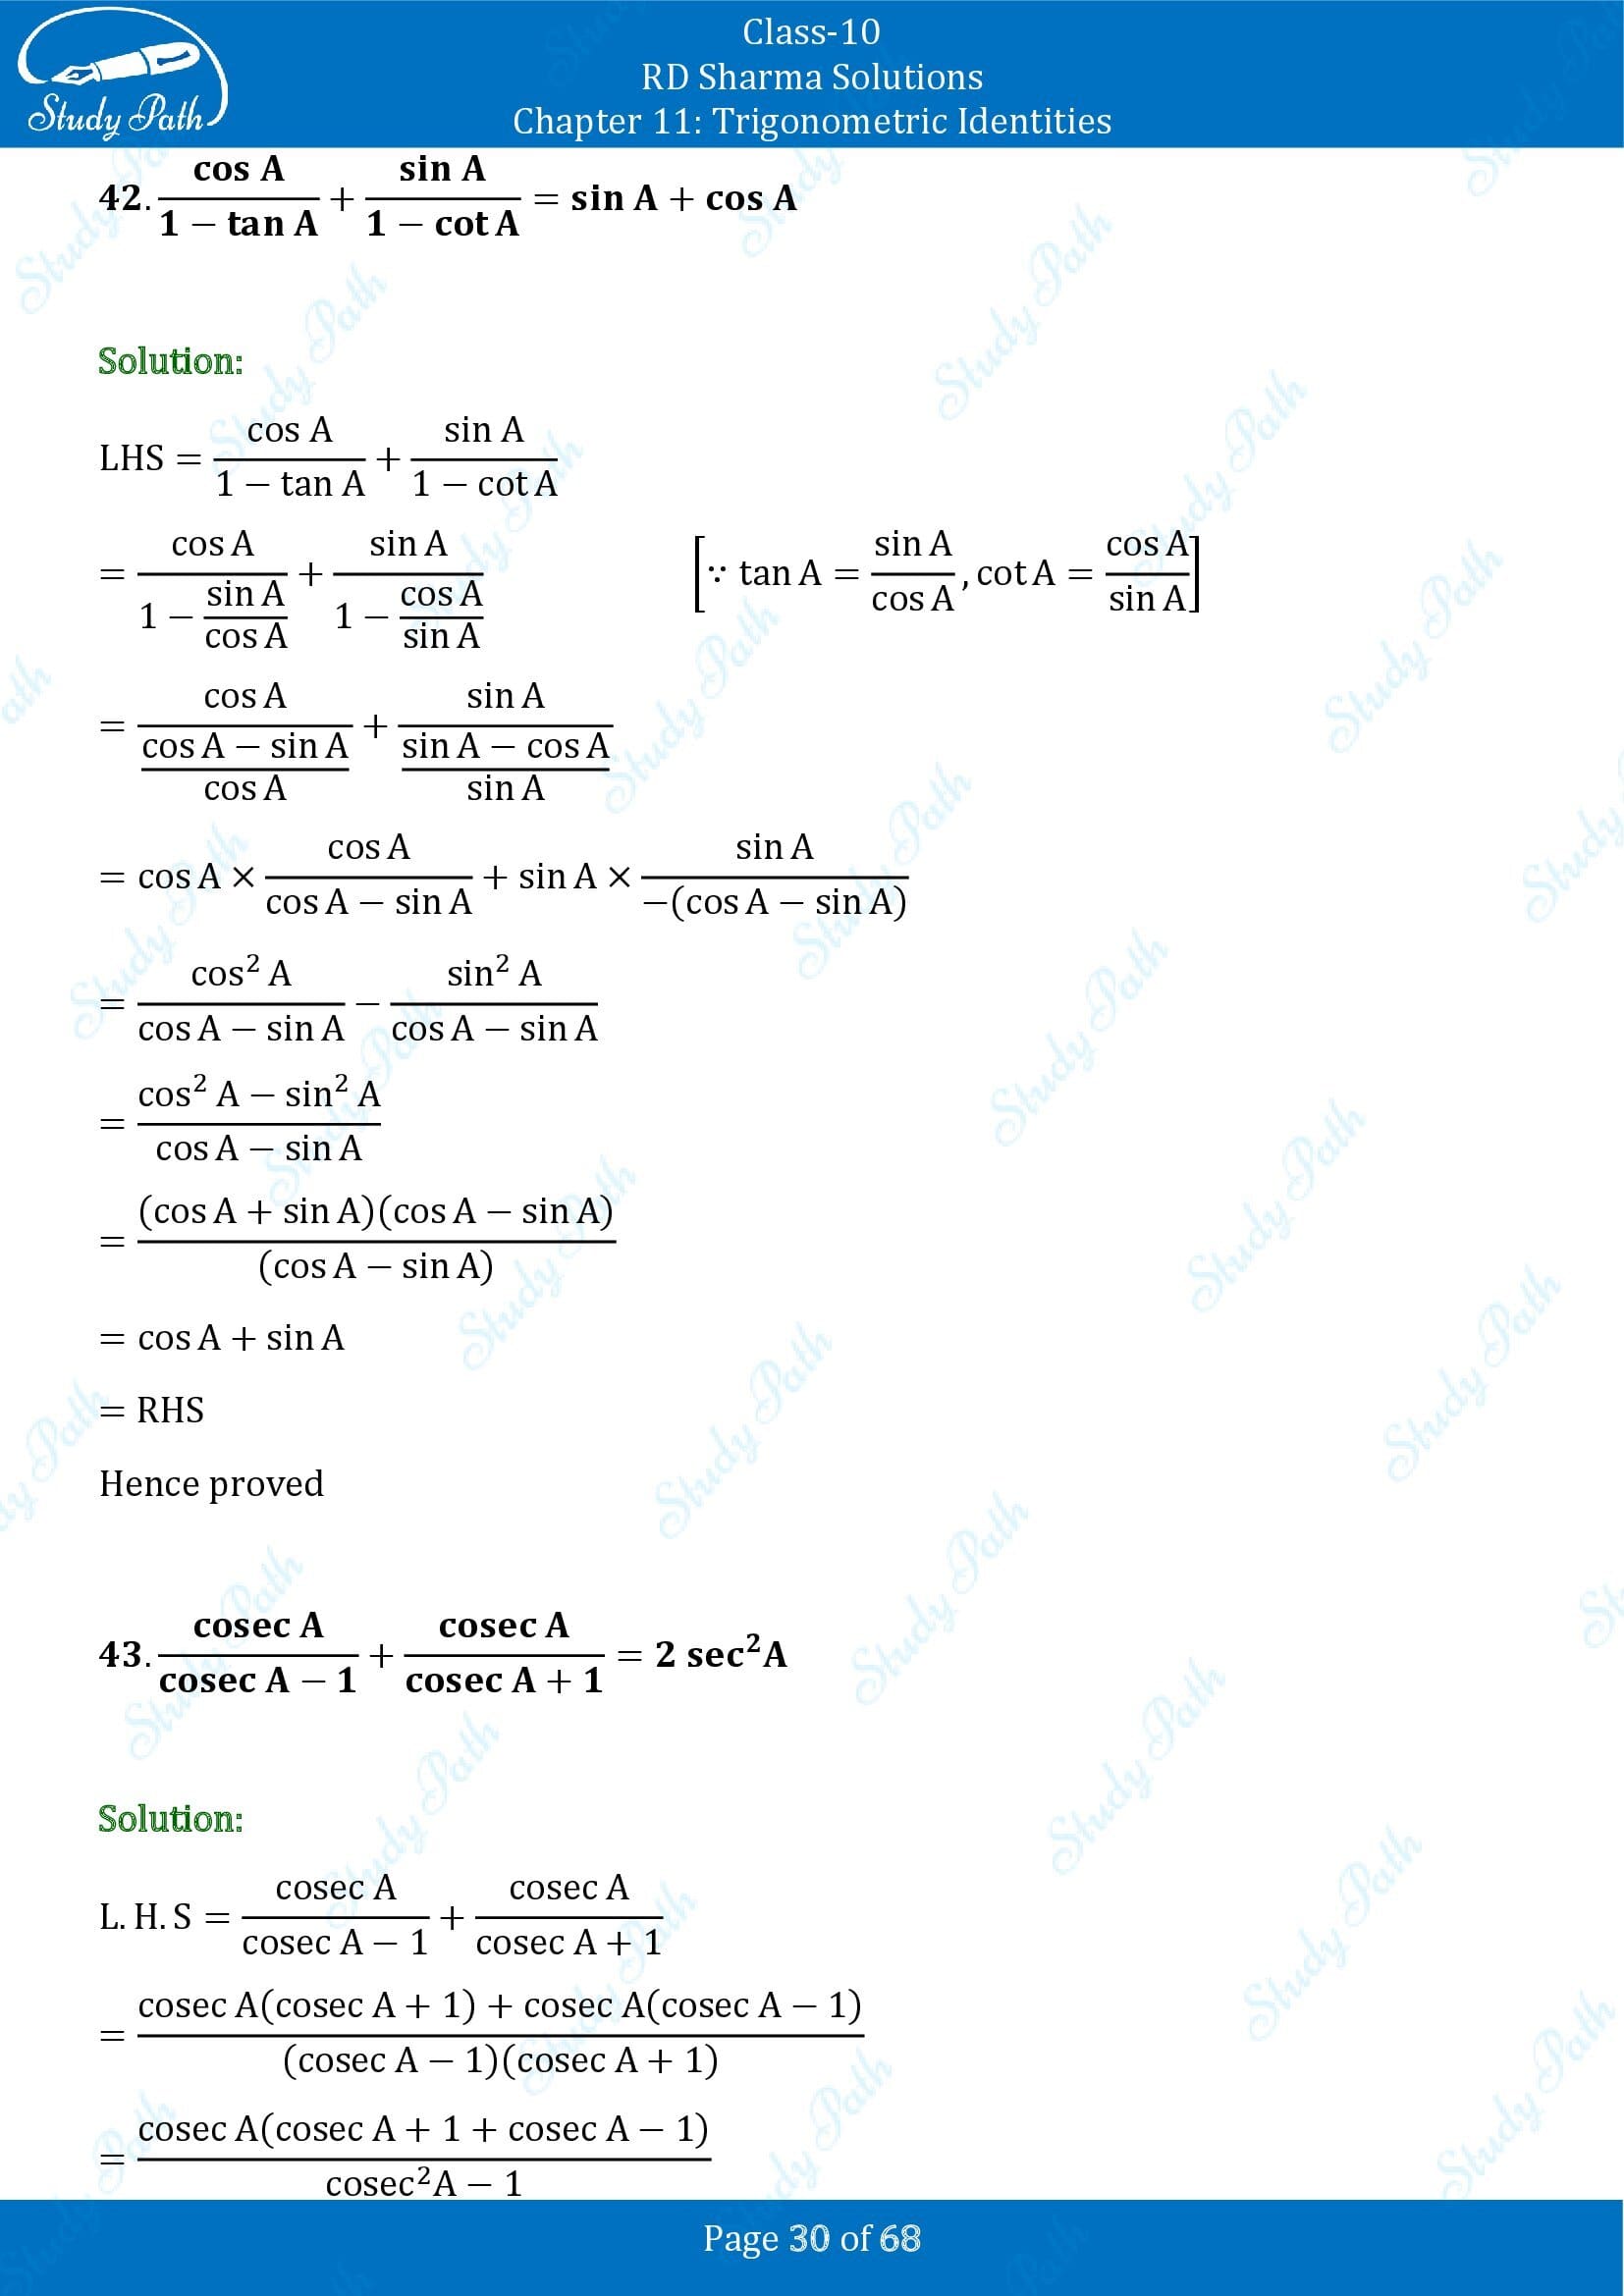 RD Sharma Solutions Class 10 Chapter 11 Trigonometric Identities Exercise 11.1 00030